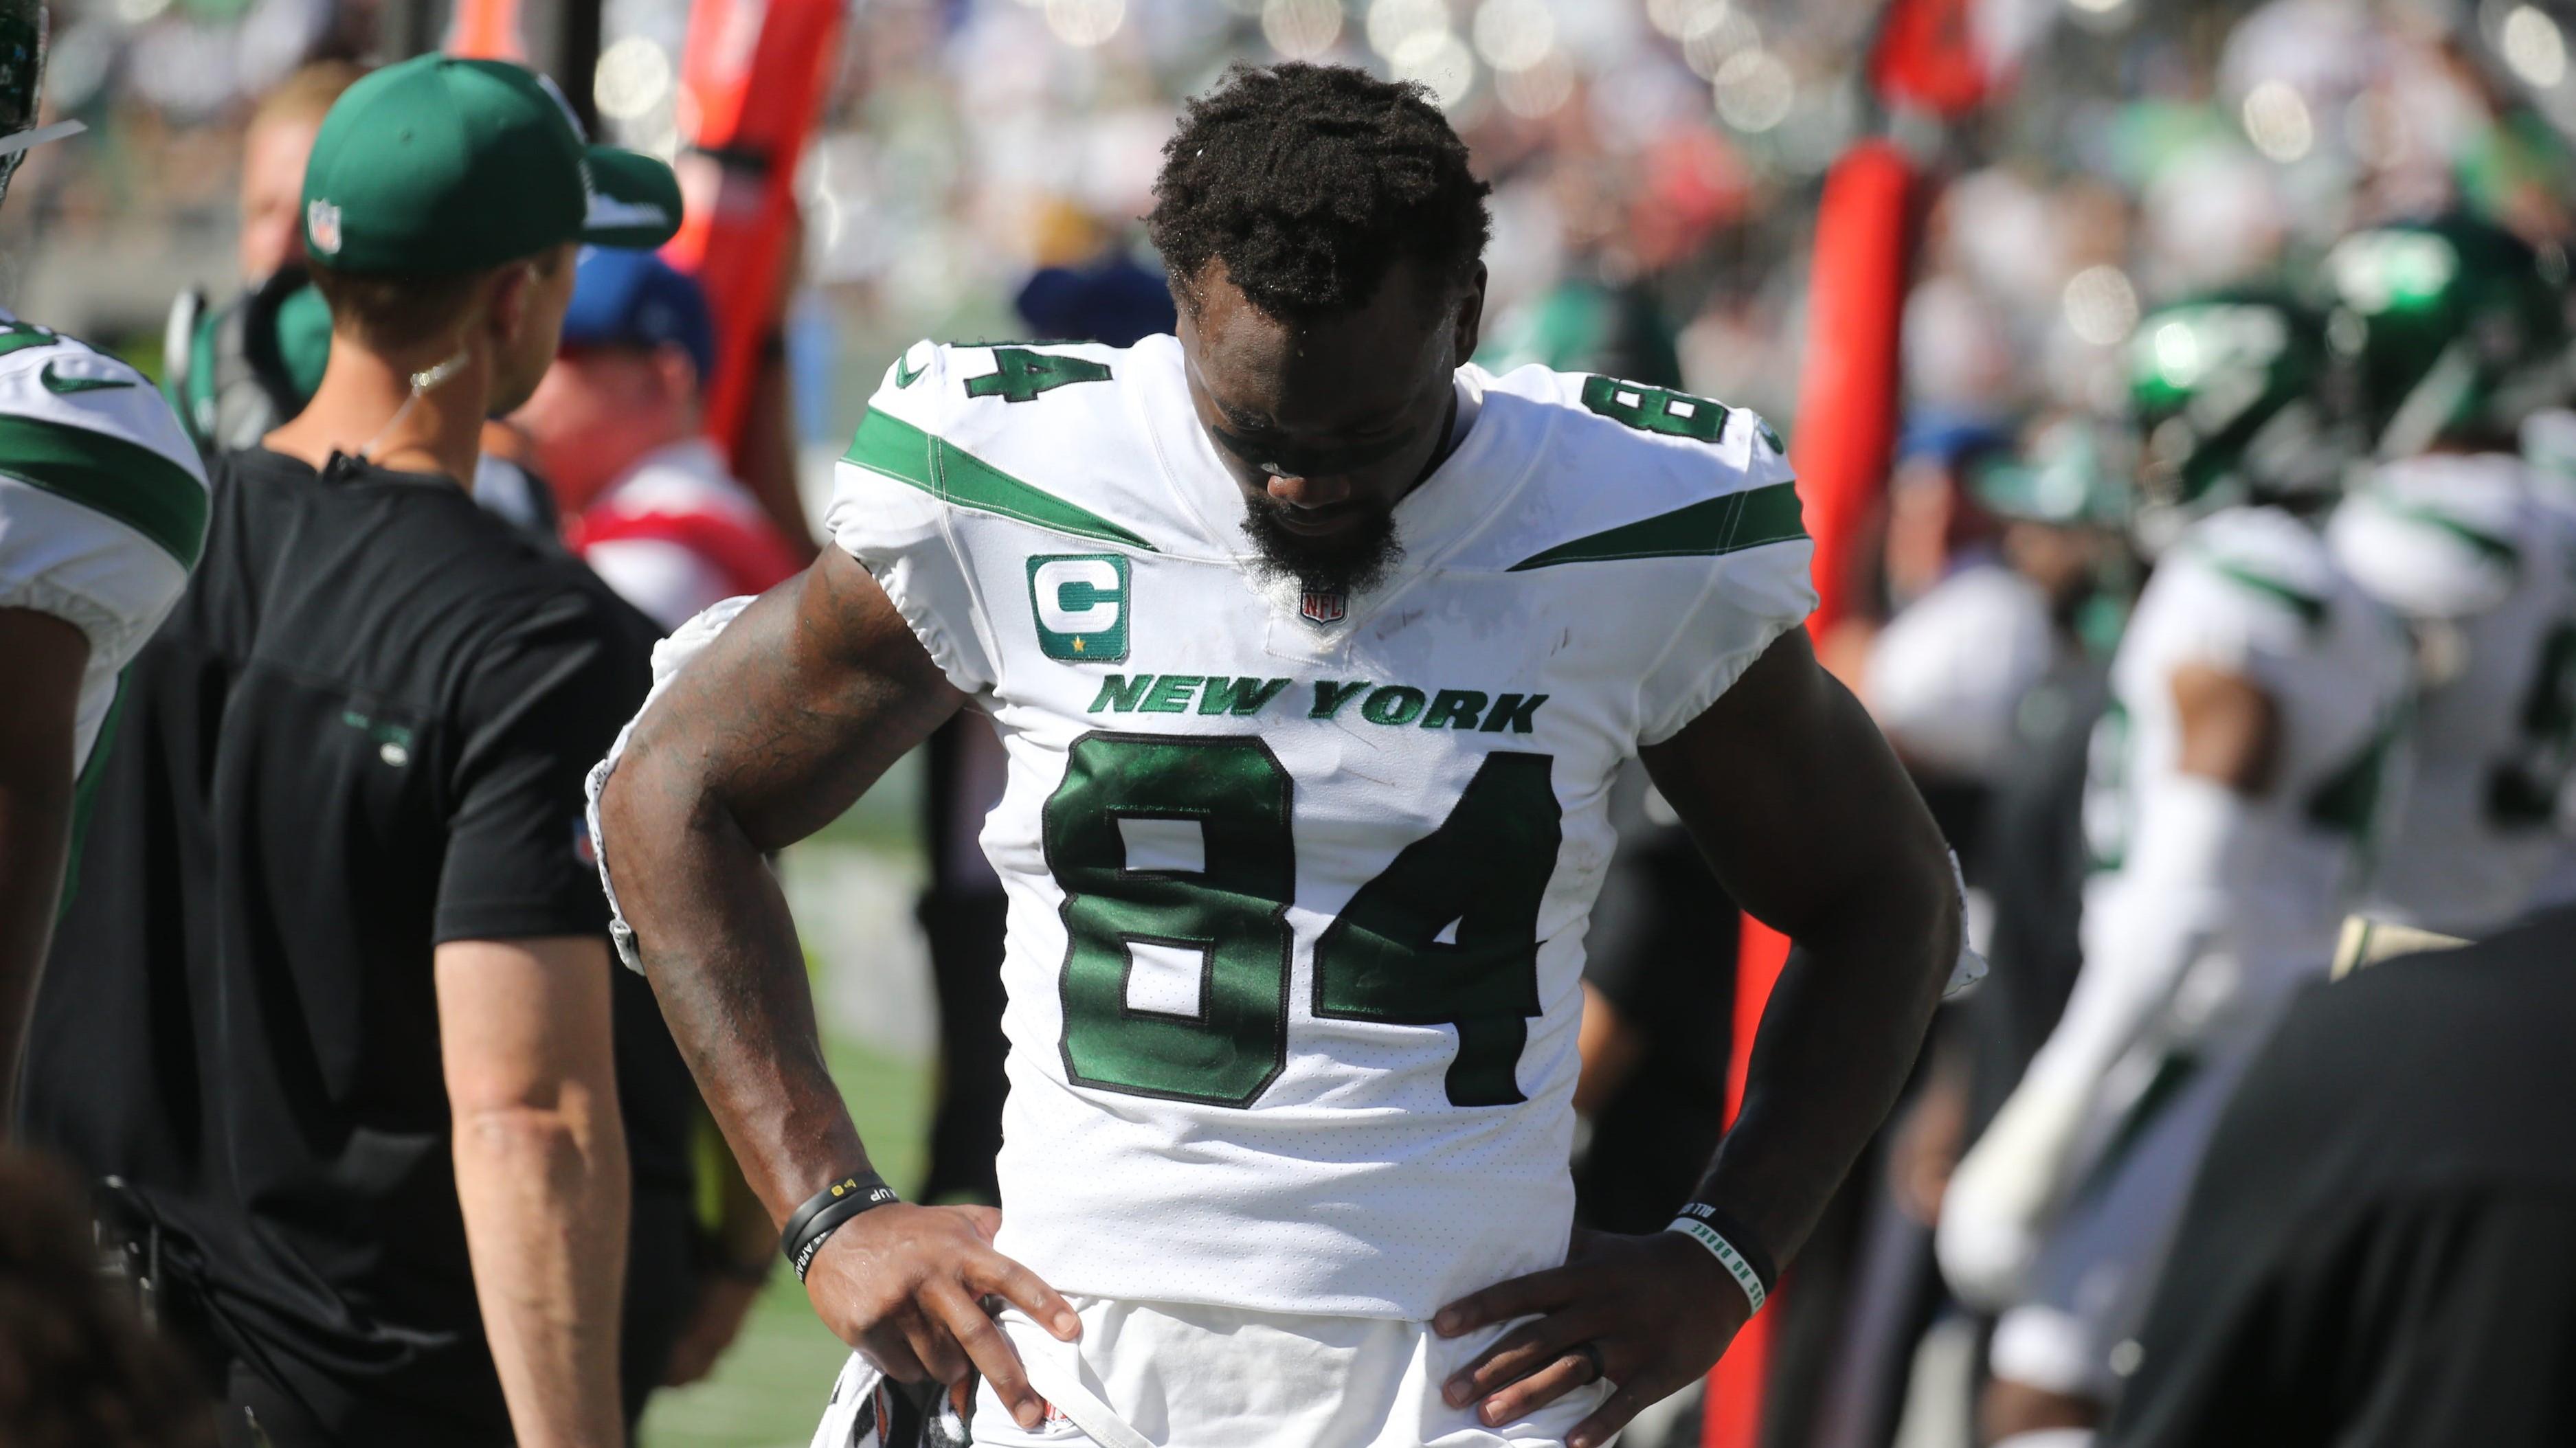 Corey Davis of the Jets on the sidelines in the second half as the New England Patriots defeated the NY Jets 25-6 at MetLife Stadium in East Rutherford, NJ on September 19, 2021. / Chris Pedota, NorthJersey.com via Imagn Content Services, LLC